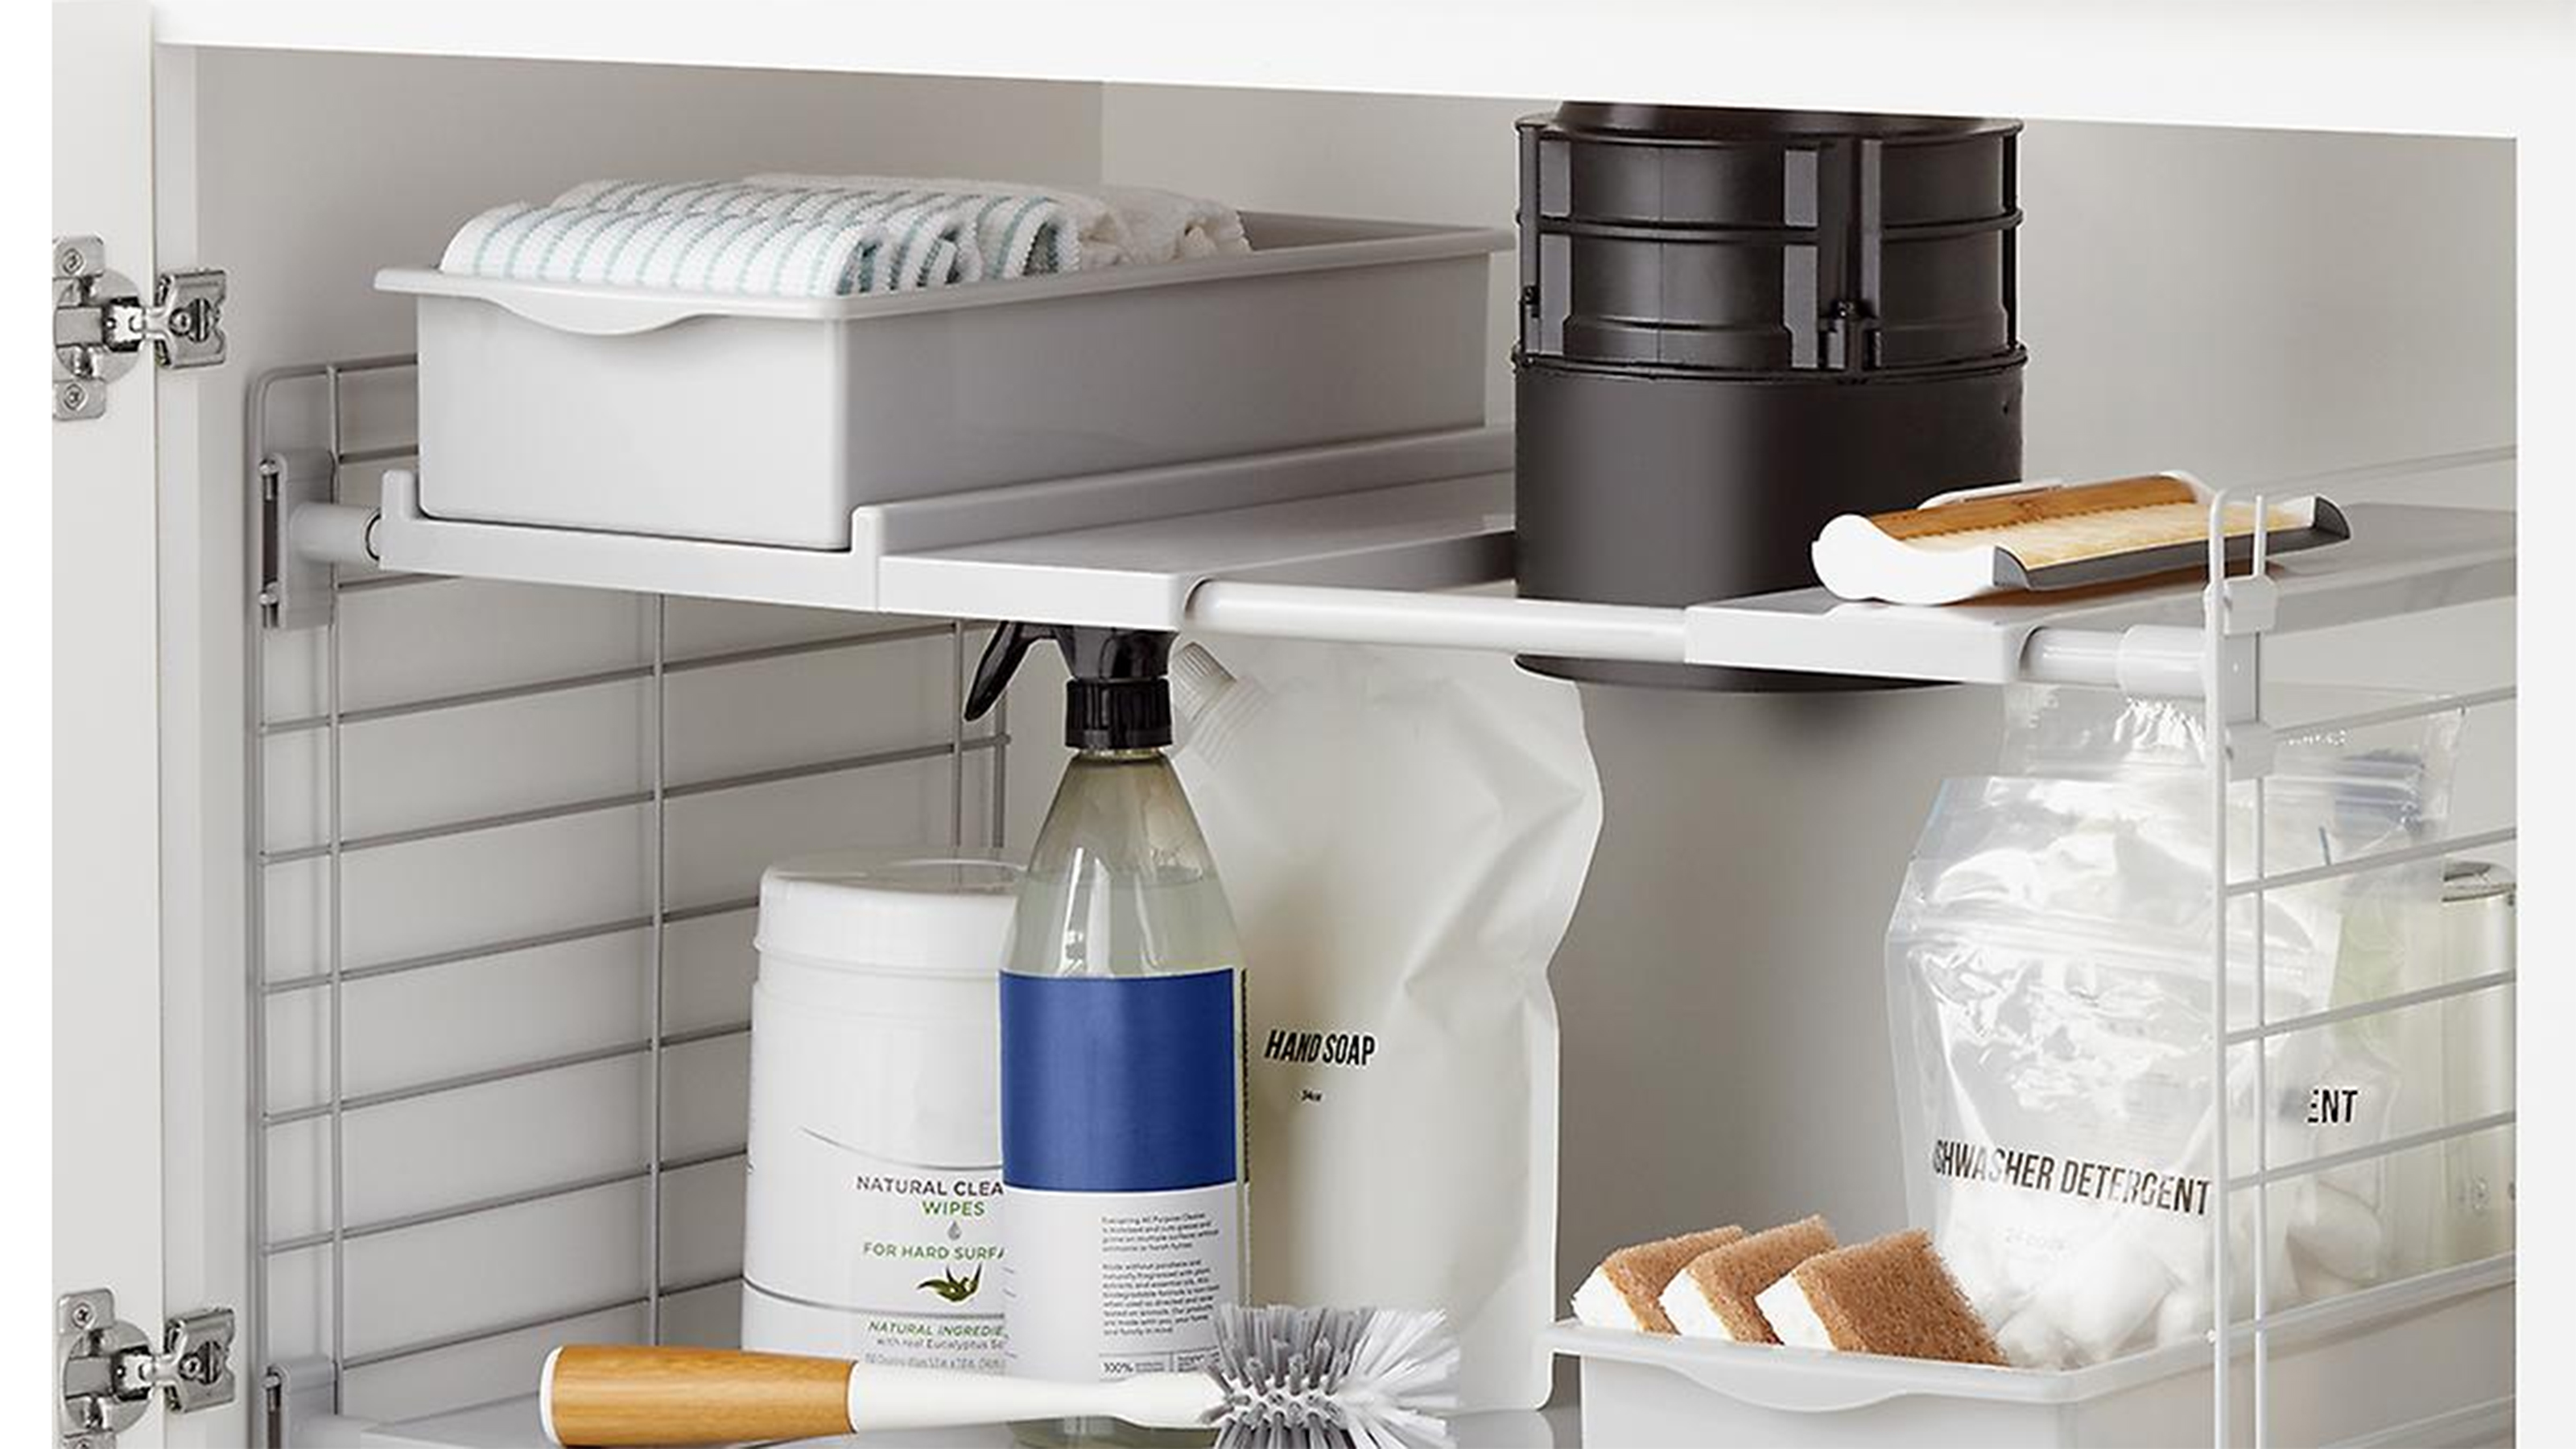 How to organize under the kitchen sink according to decluttering experts